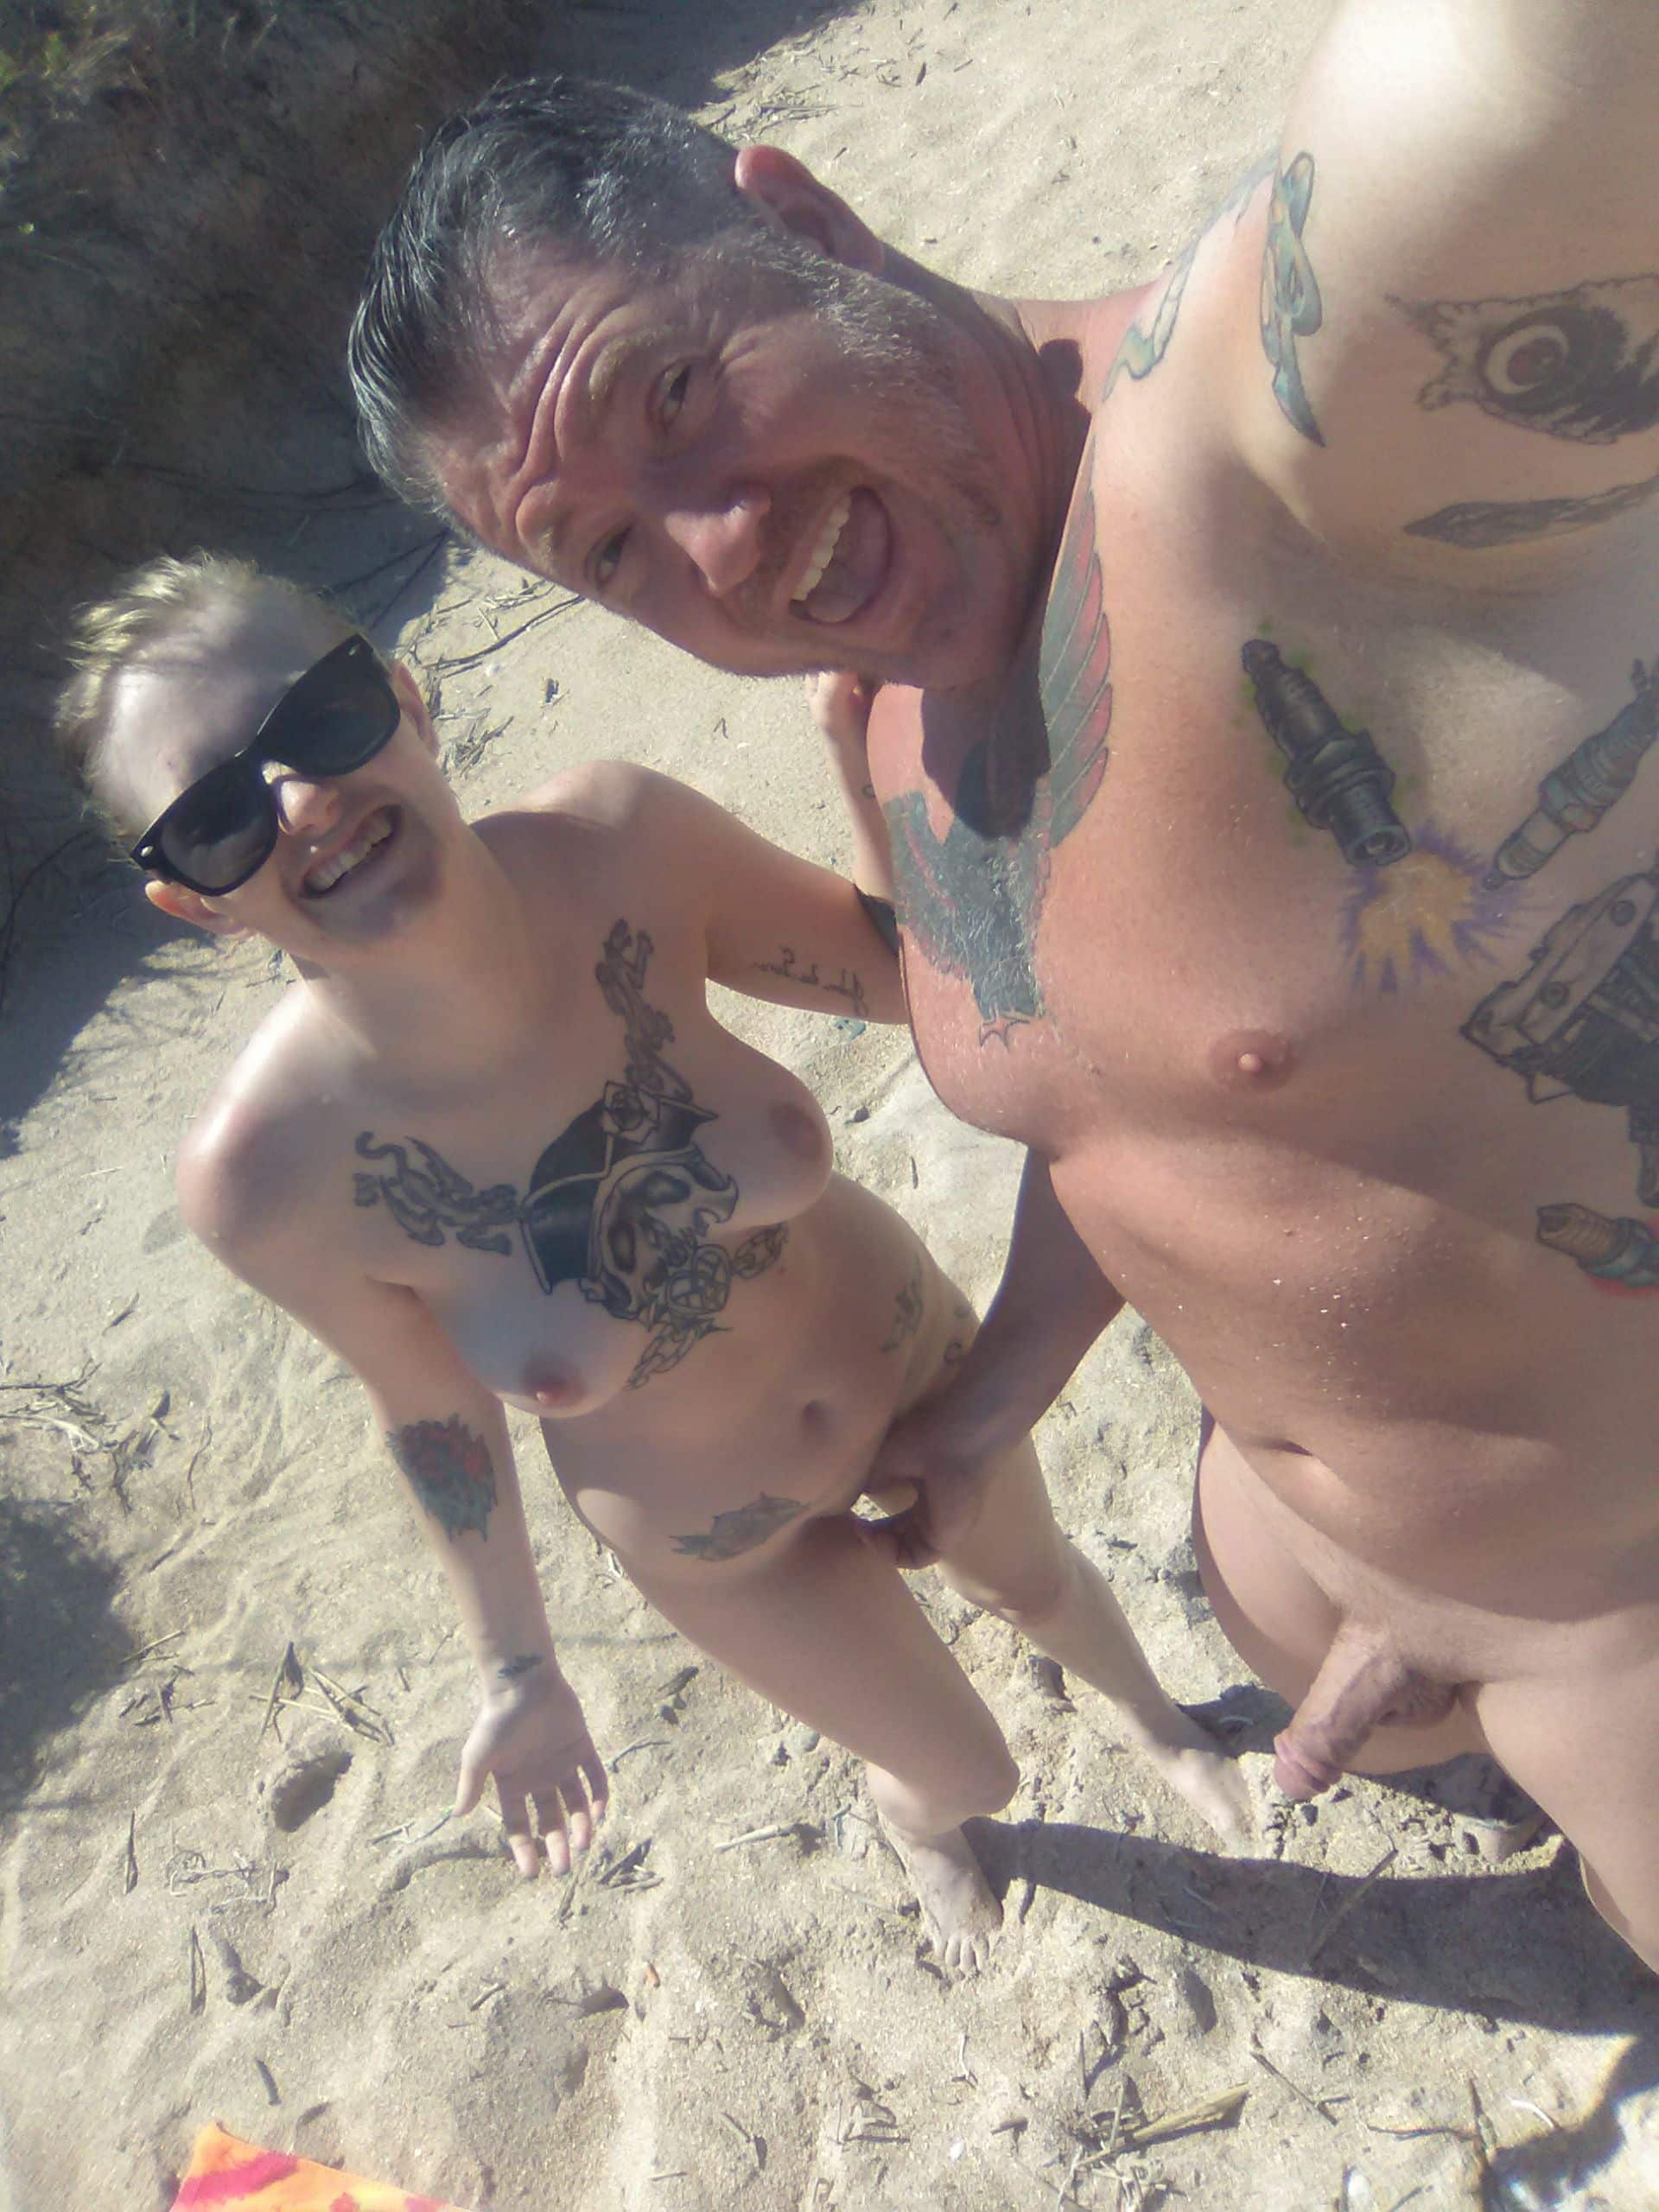 Tattooed exhibionist couple Outdoor selfie Nude Beach Pics, Public Nudity Pics, Real Amateurs from Google, Tumblr, Pinterest, Facebook, Twitter, Instagram and Snapchat.